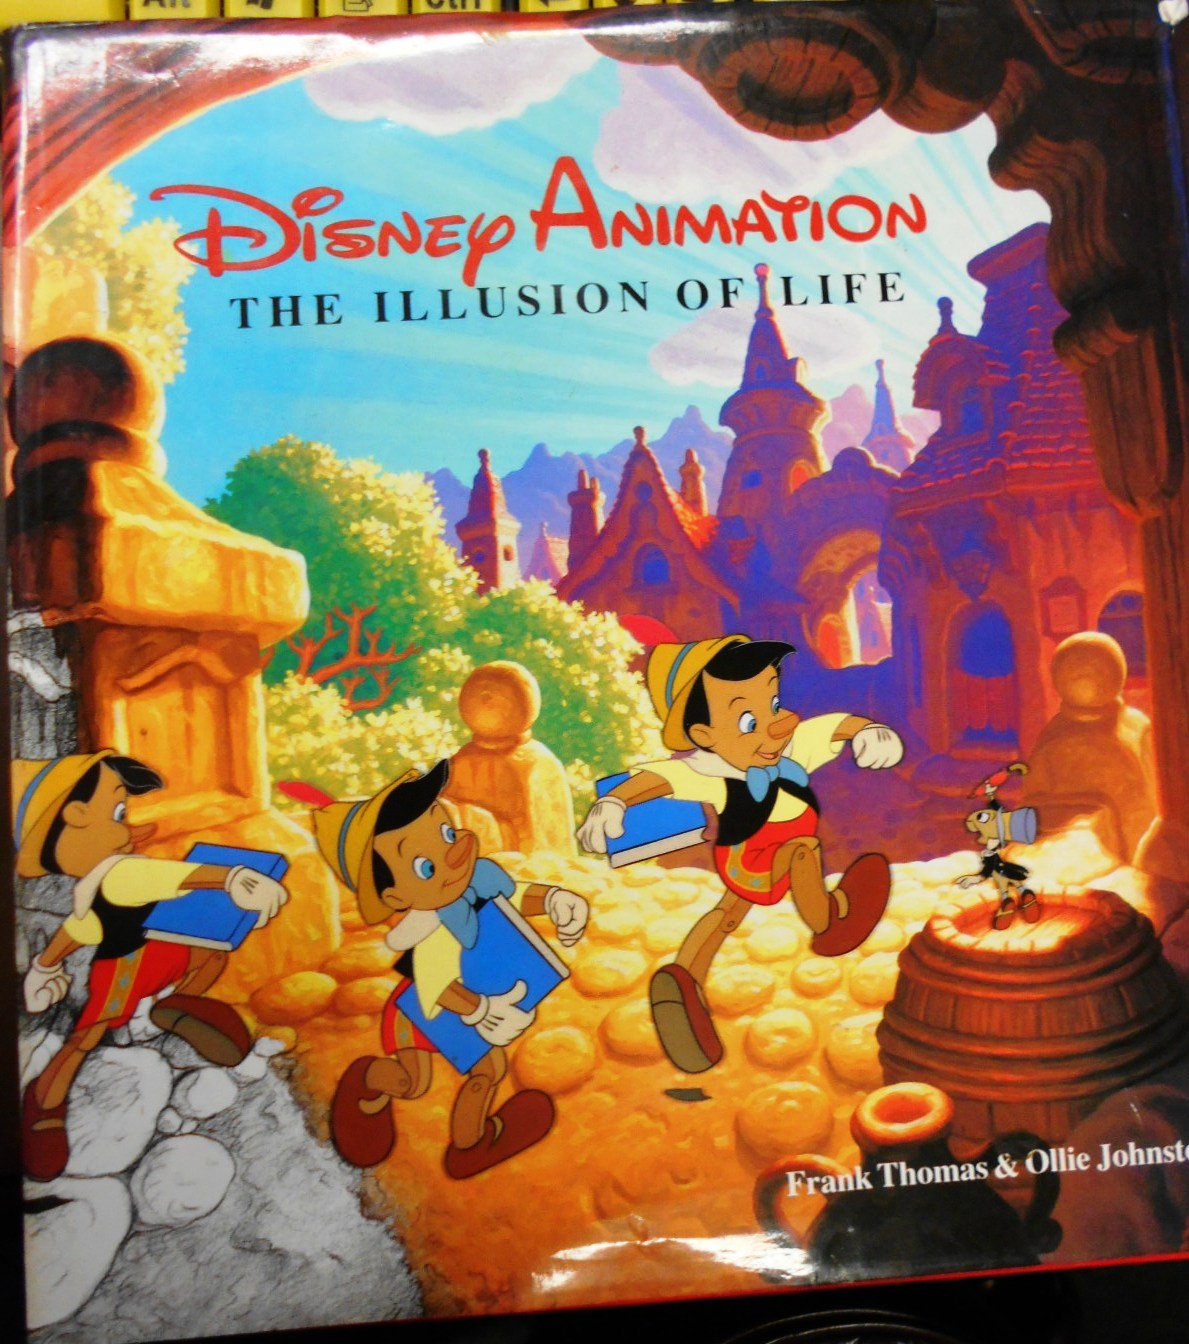 The Illusion of Life (Hardcover, 1995)